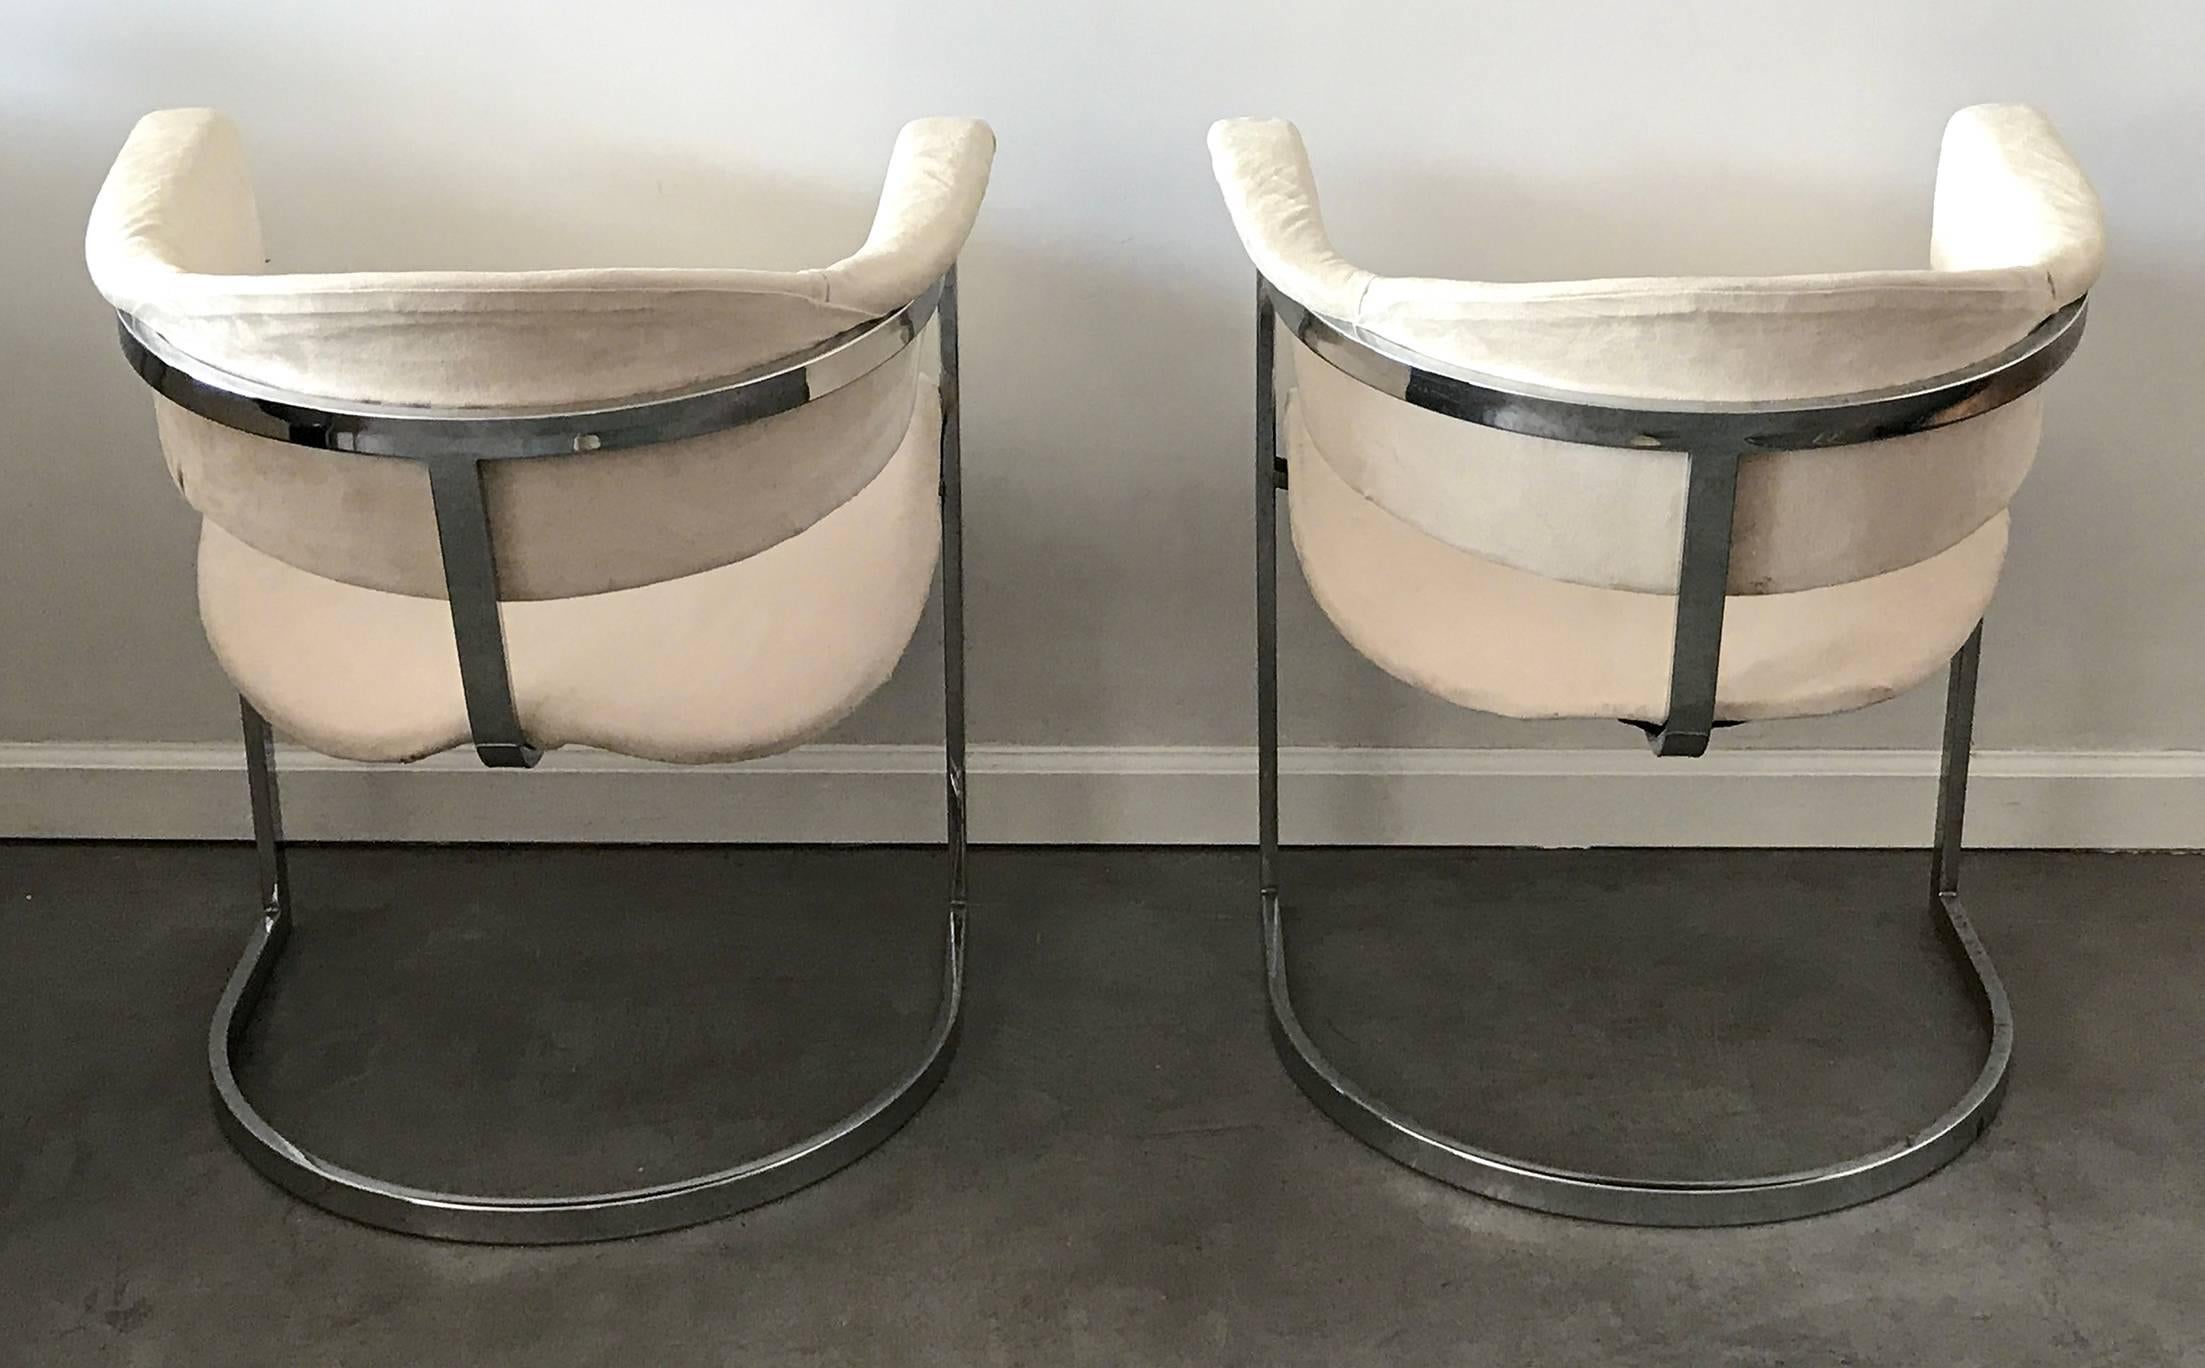 A stunning set of Mario Sabot chrome arm chairs upholstered in a cream colored microsuede material. These accent chairs would compliment any modern or contemporary environment quite nicely.